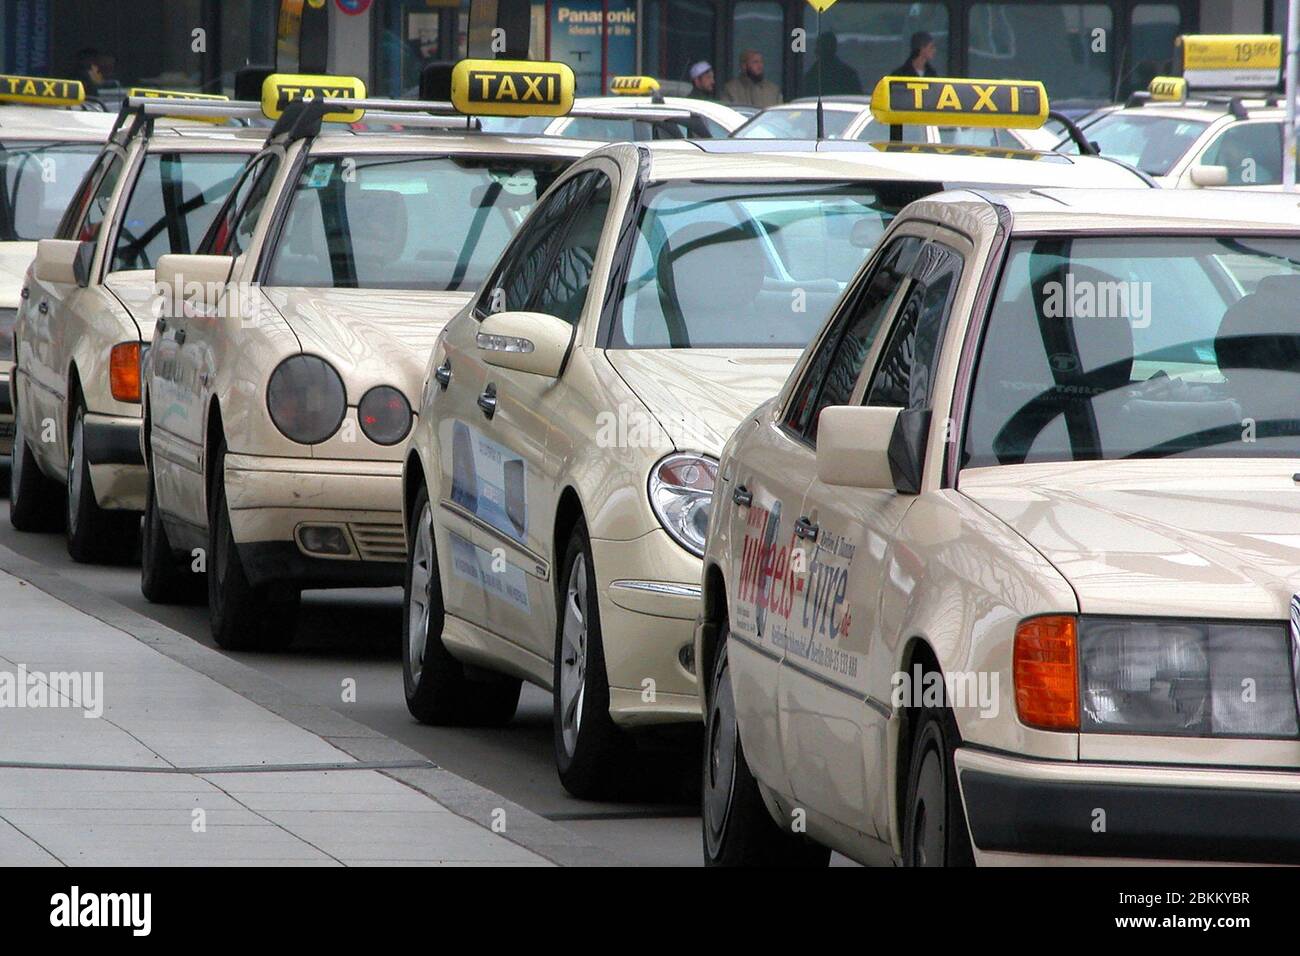 Taxis am Taxenstand Stock Photo